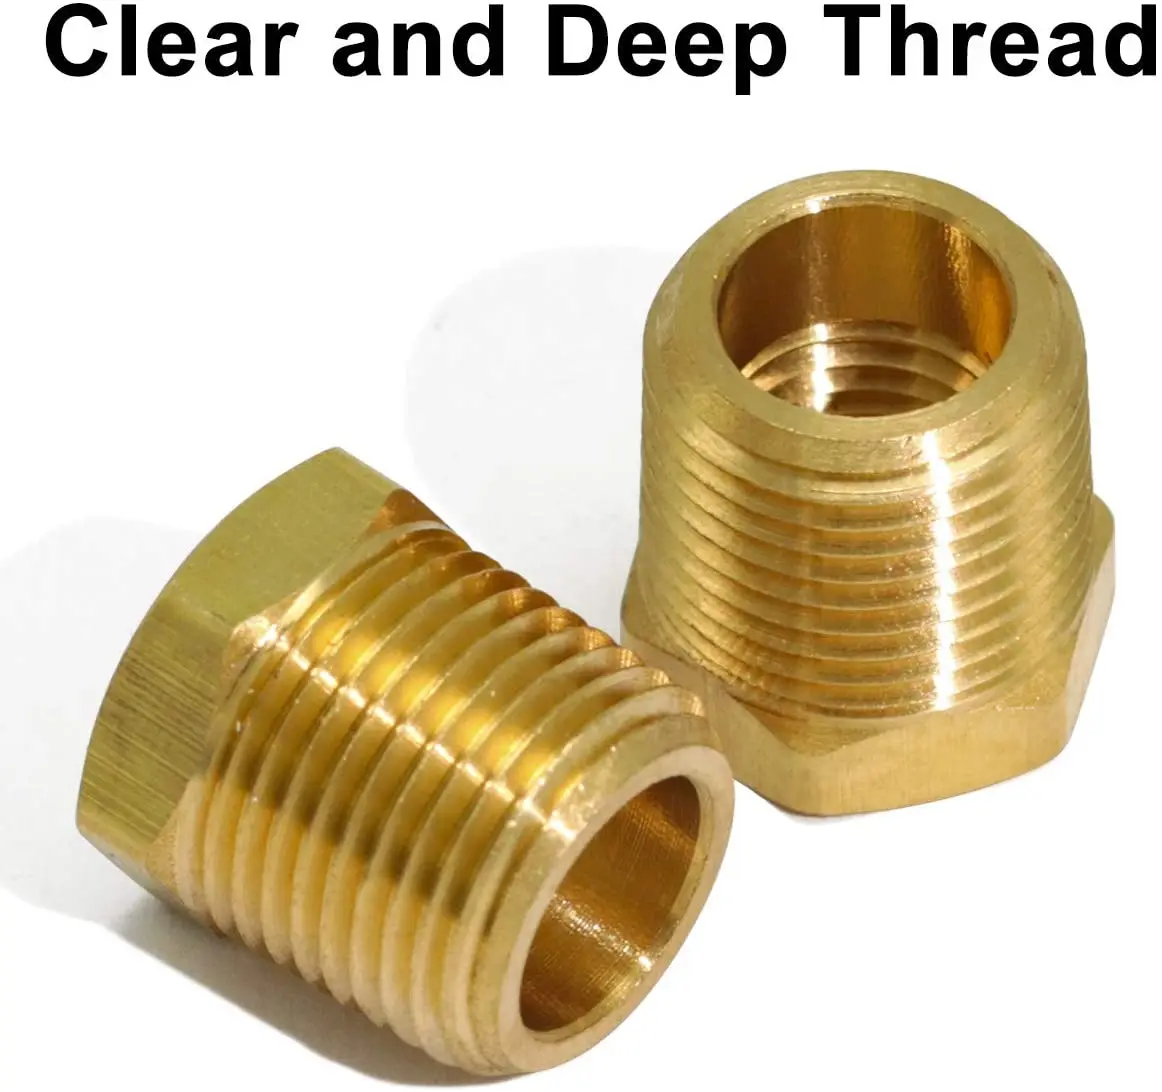 BRASS HEX BUSHING REDUCING NPT THREADS PIPE FITTING 1/2 MALE X 1/4 FEMALE QTY 25 